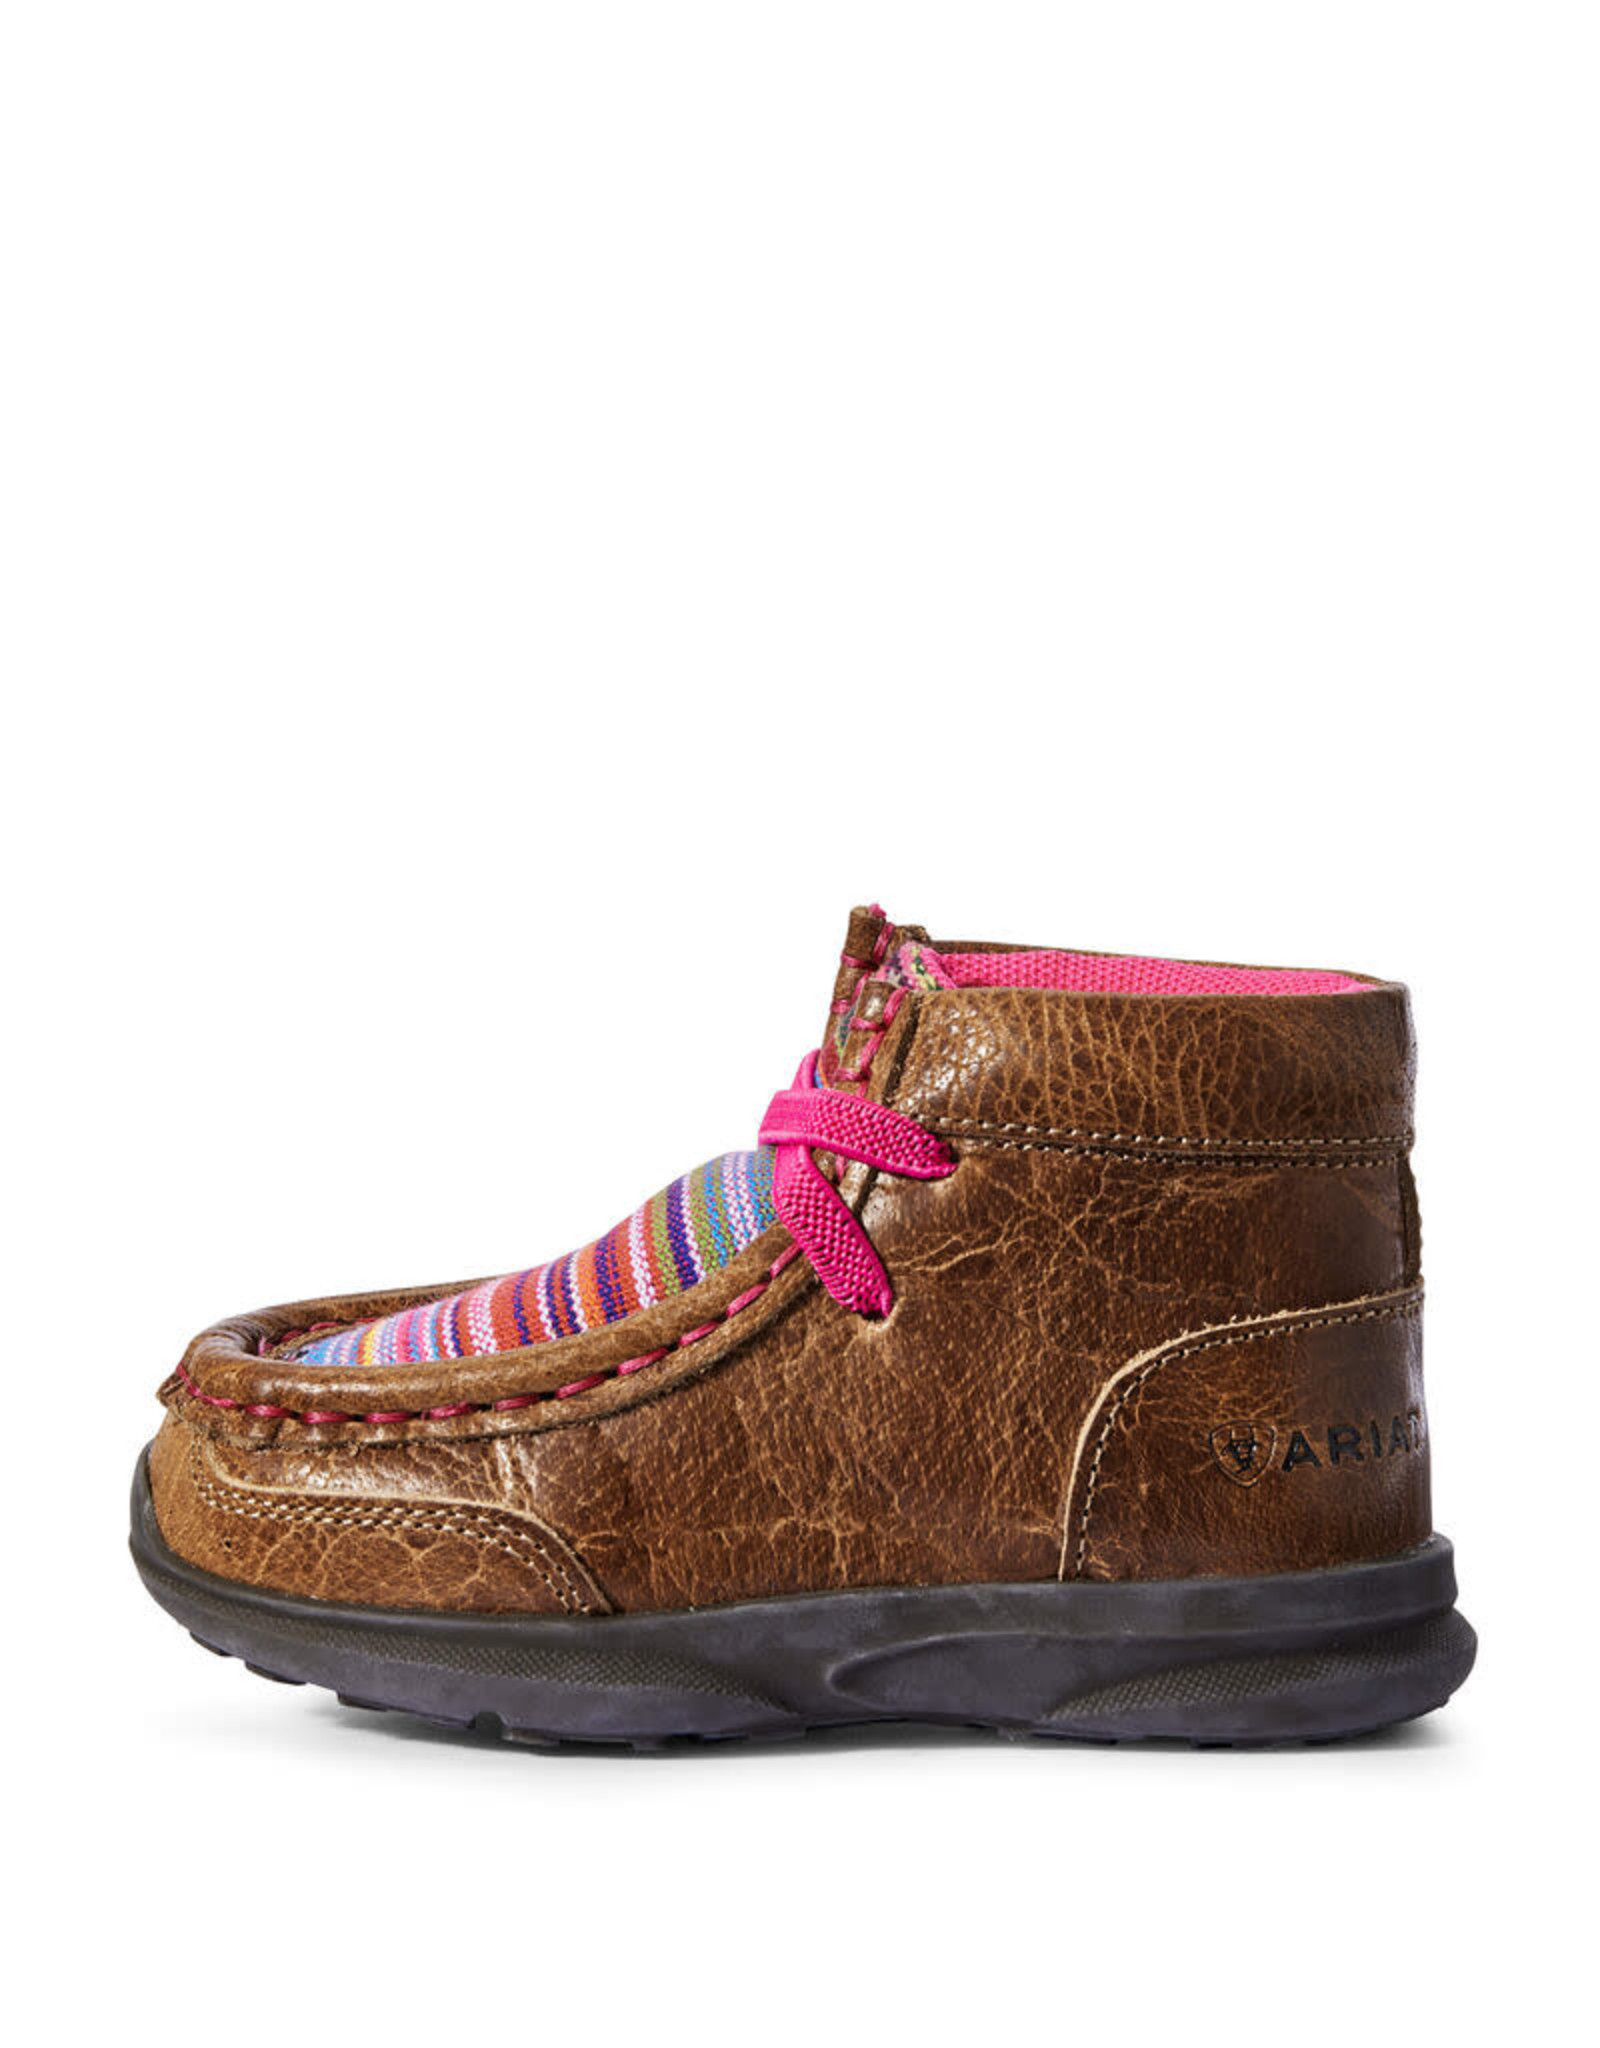 Toddler Ariat Lil Stompers Aurora Boots